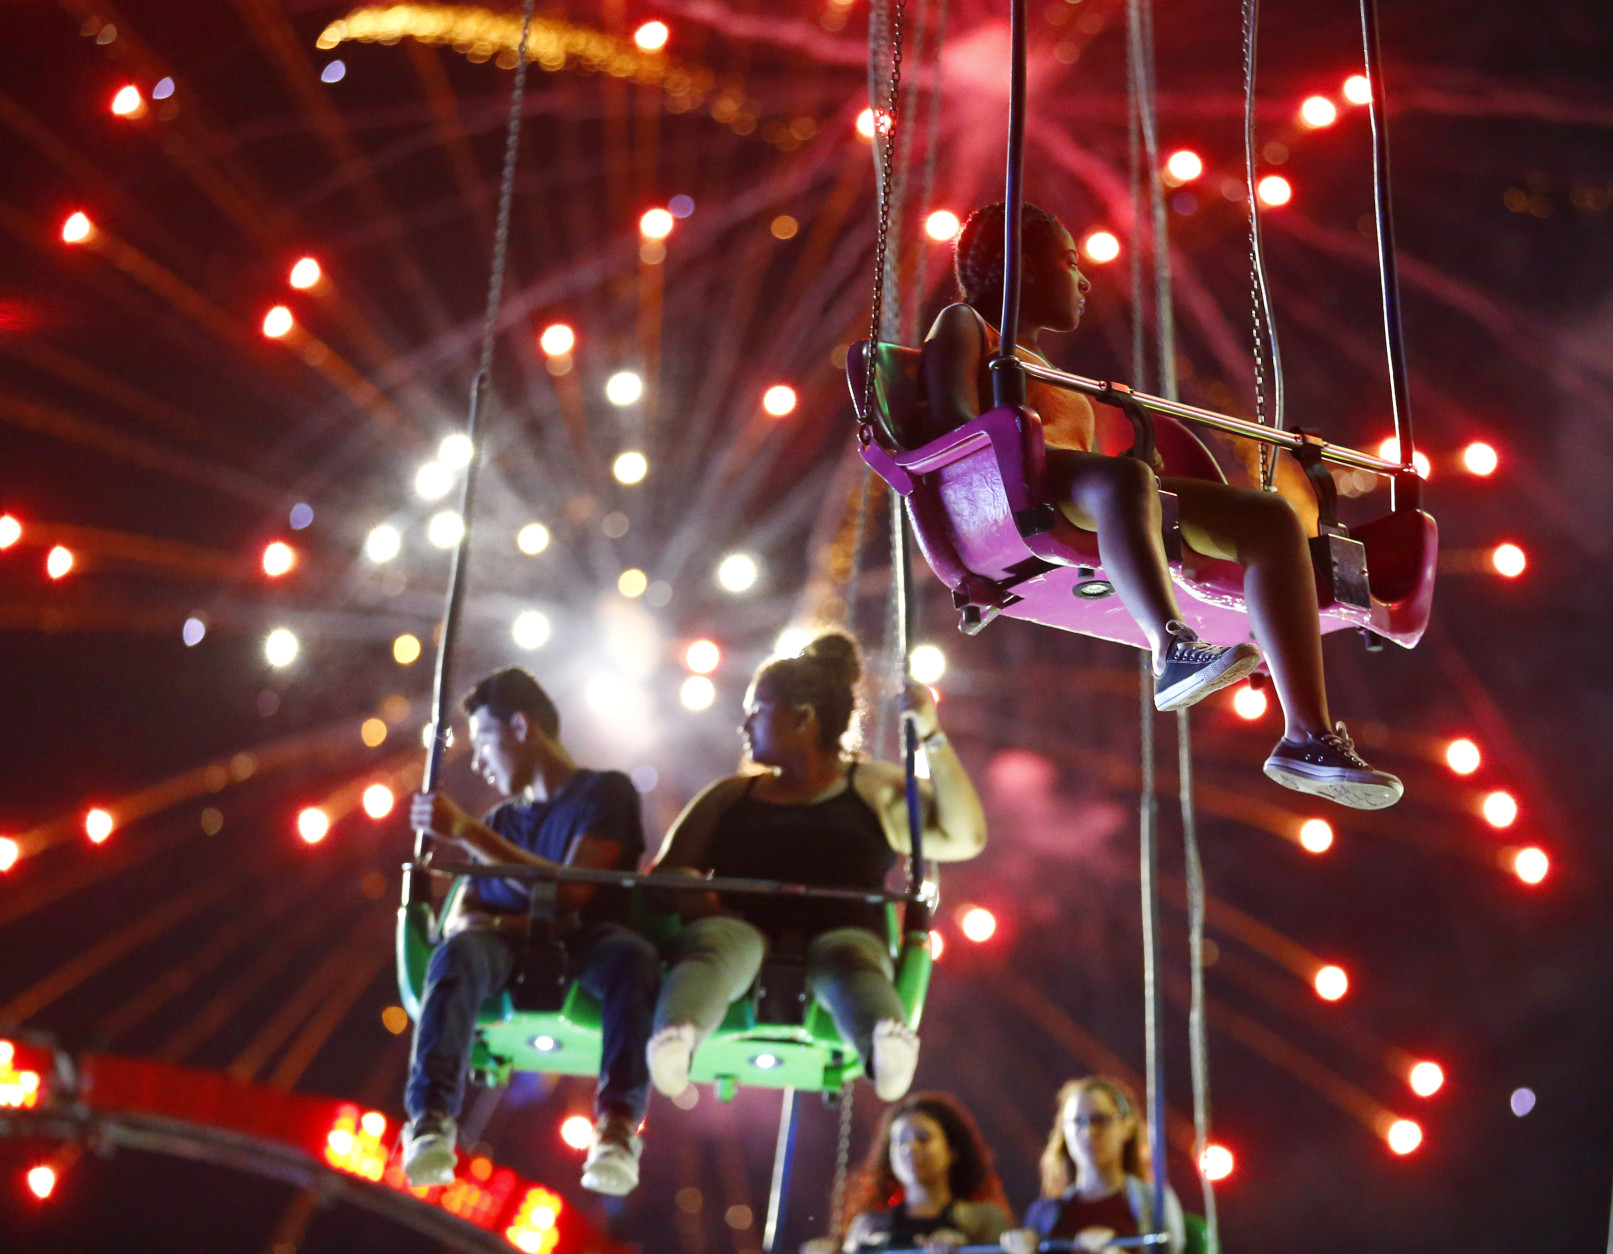 People ride the Sky Flyer at State Fair Meadowlands carnival as fireworks explode, Sunday, July 3, 2016, in East Rutherford, N.J. (AP Photo/Julio Cortez)